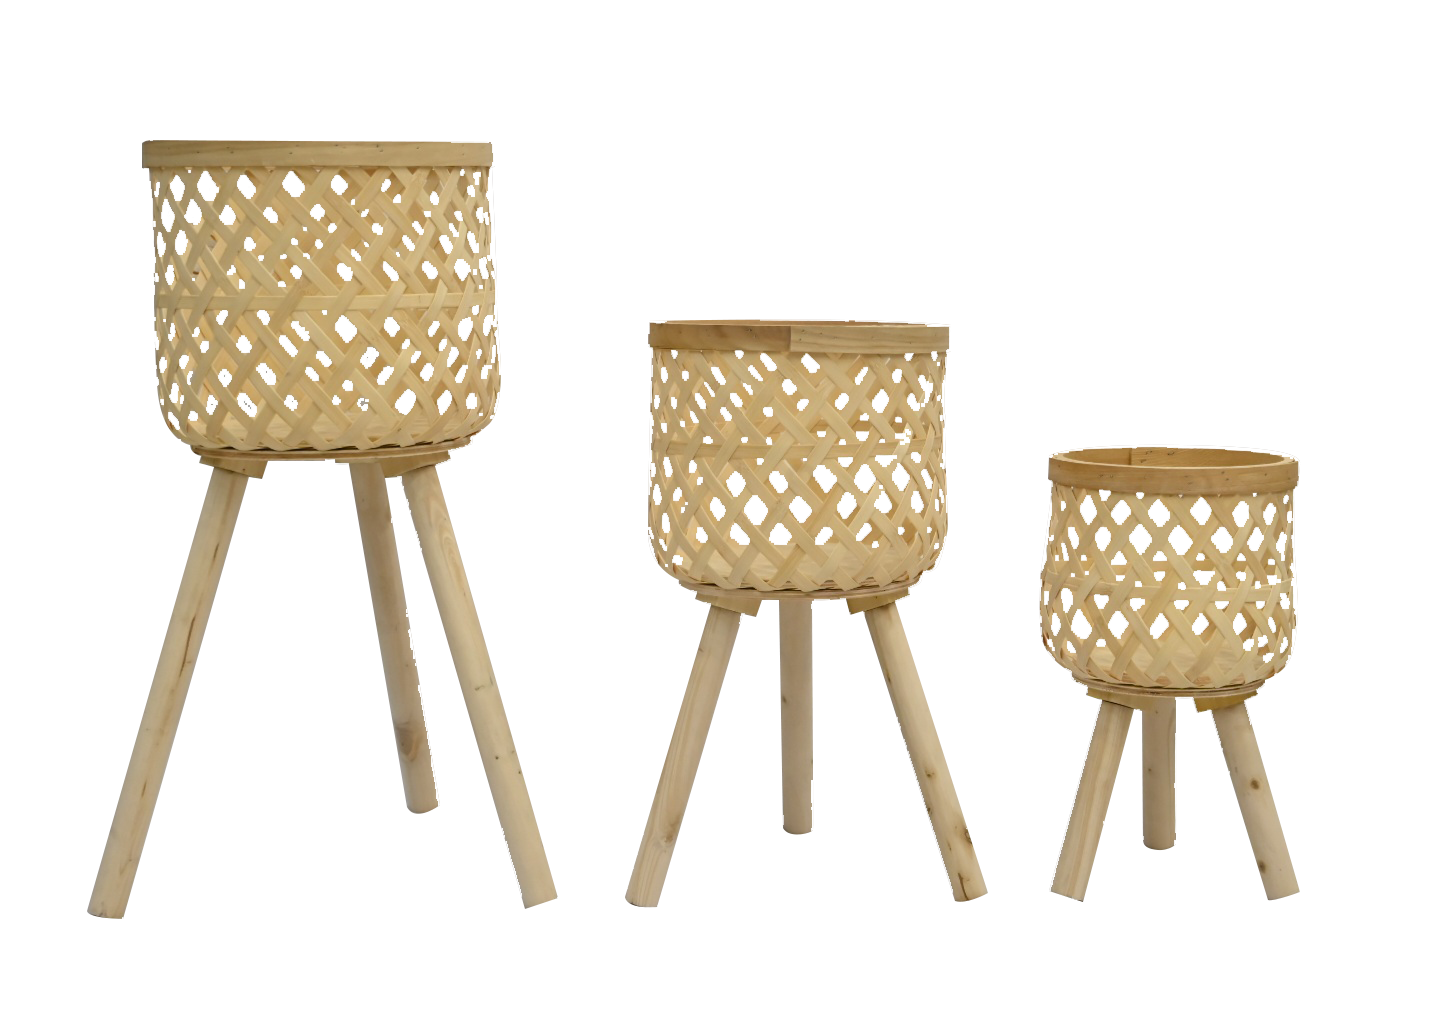 Woven Bamboo Floor Baskets with Wood Legs (3 Pcs Set)